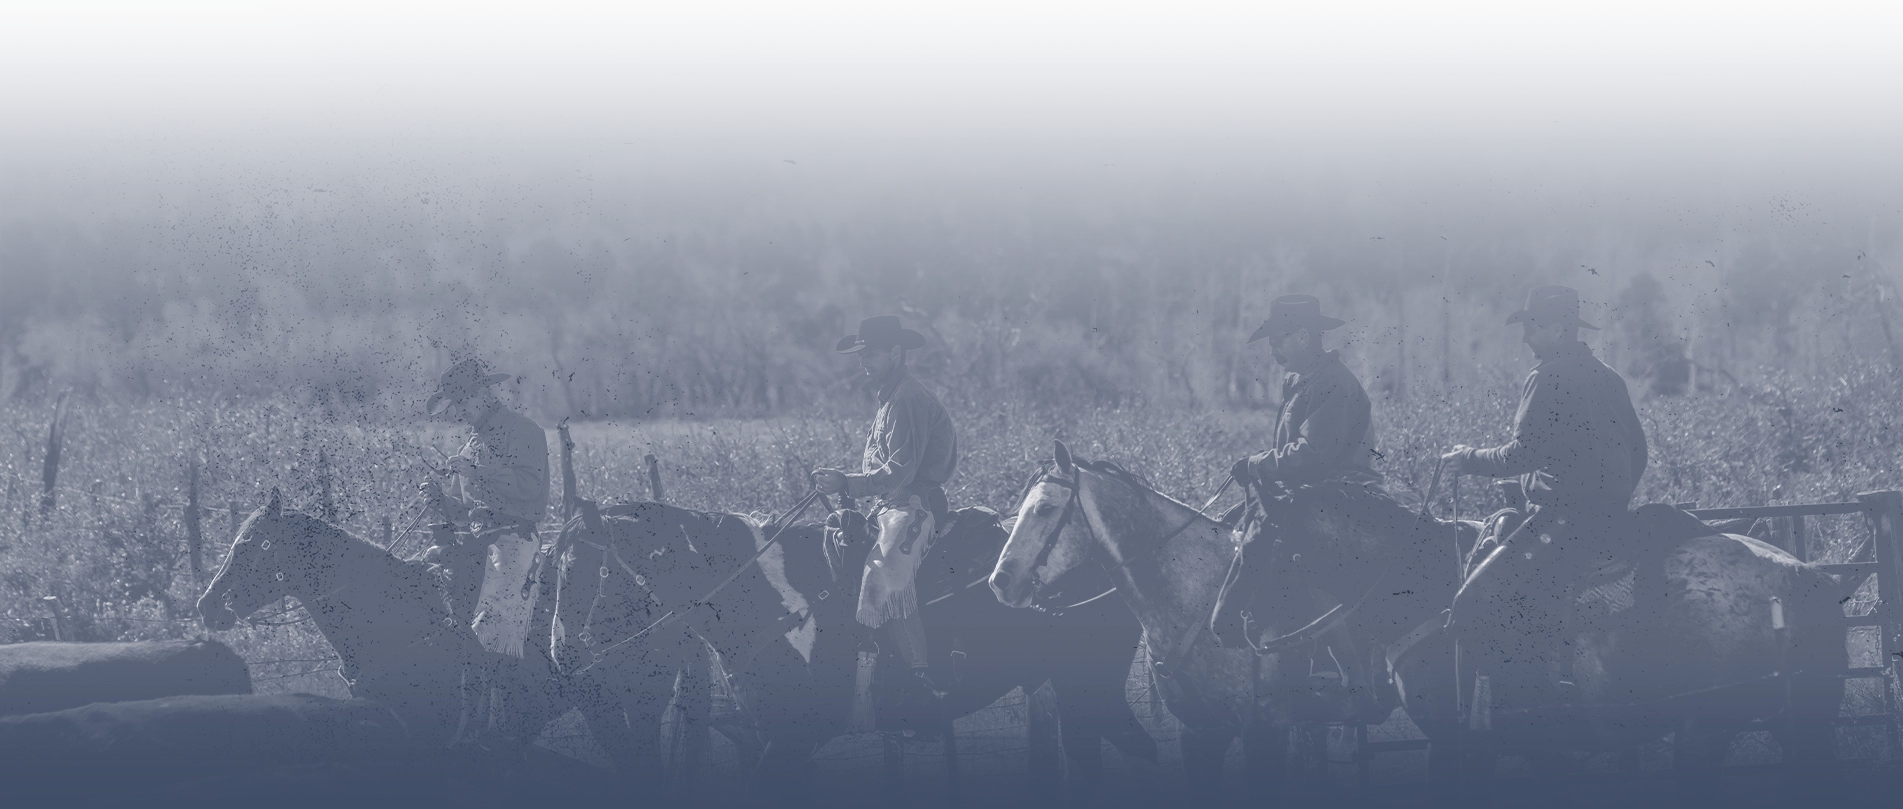 Four cowboys on horseback riding in a field going left. The image has a weathered overlay and fades to blue on the bottom.